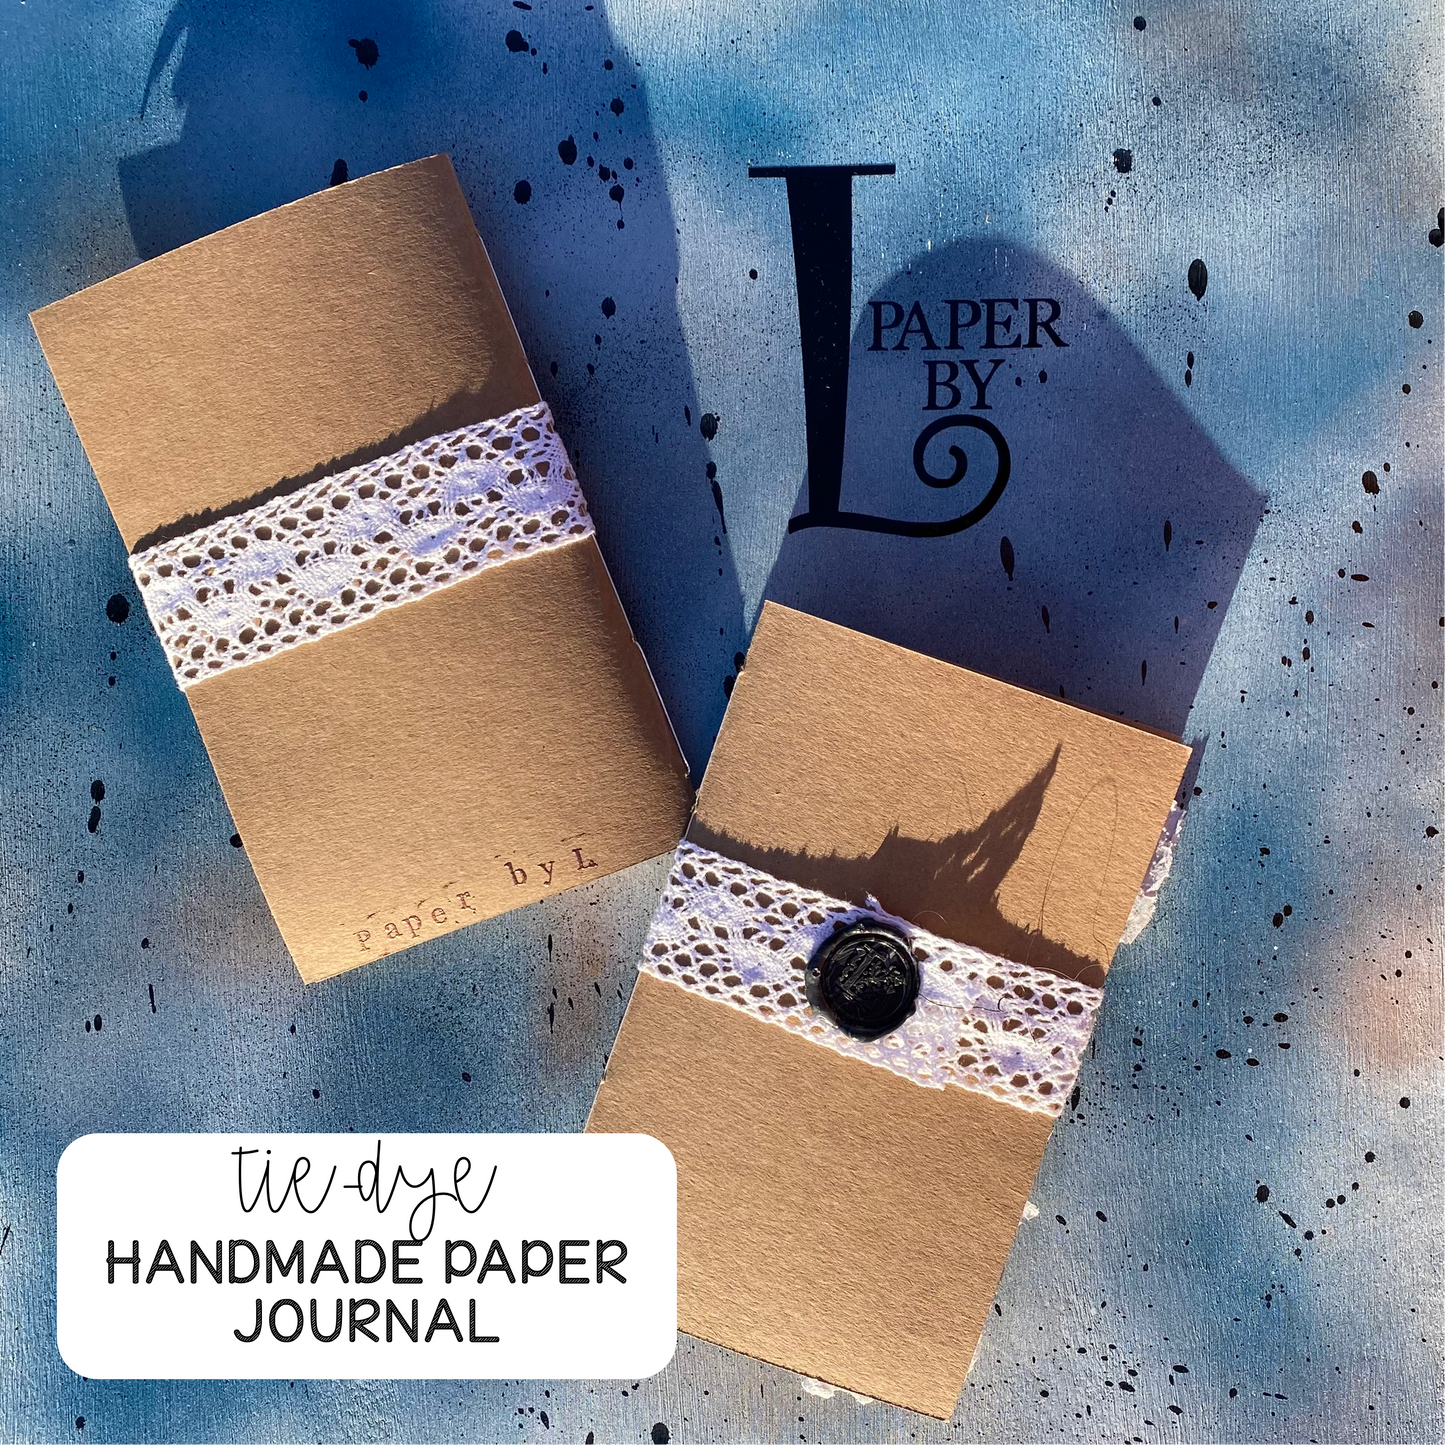 Handmade Journal - Paper by L